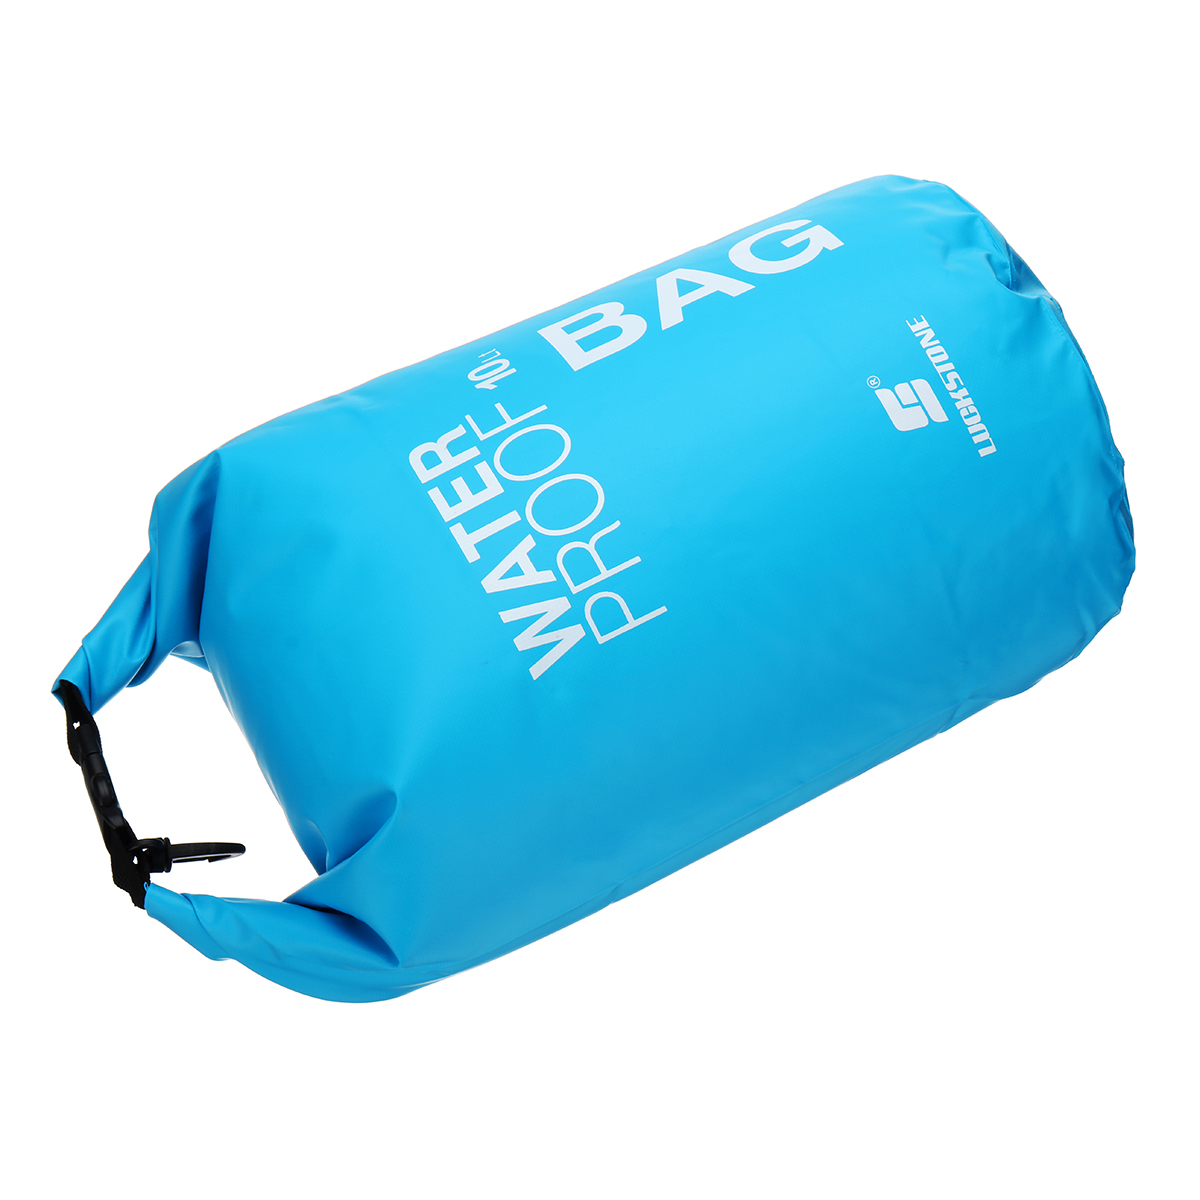 10L-Outdoor-Swimming-Air-Inflation-Floating-Mobile-Phone-Camera-Storage-PVC-Waterproof-Bag-1820807-6